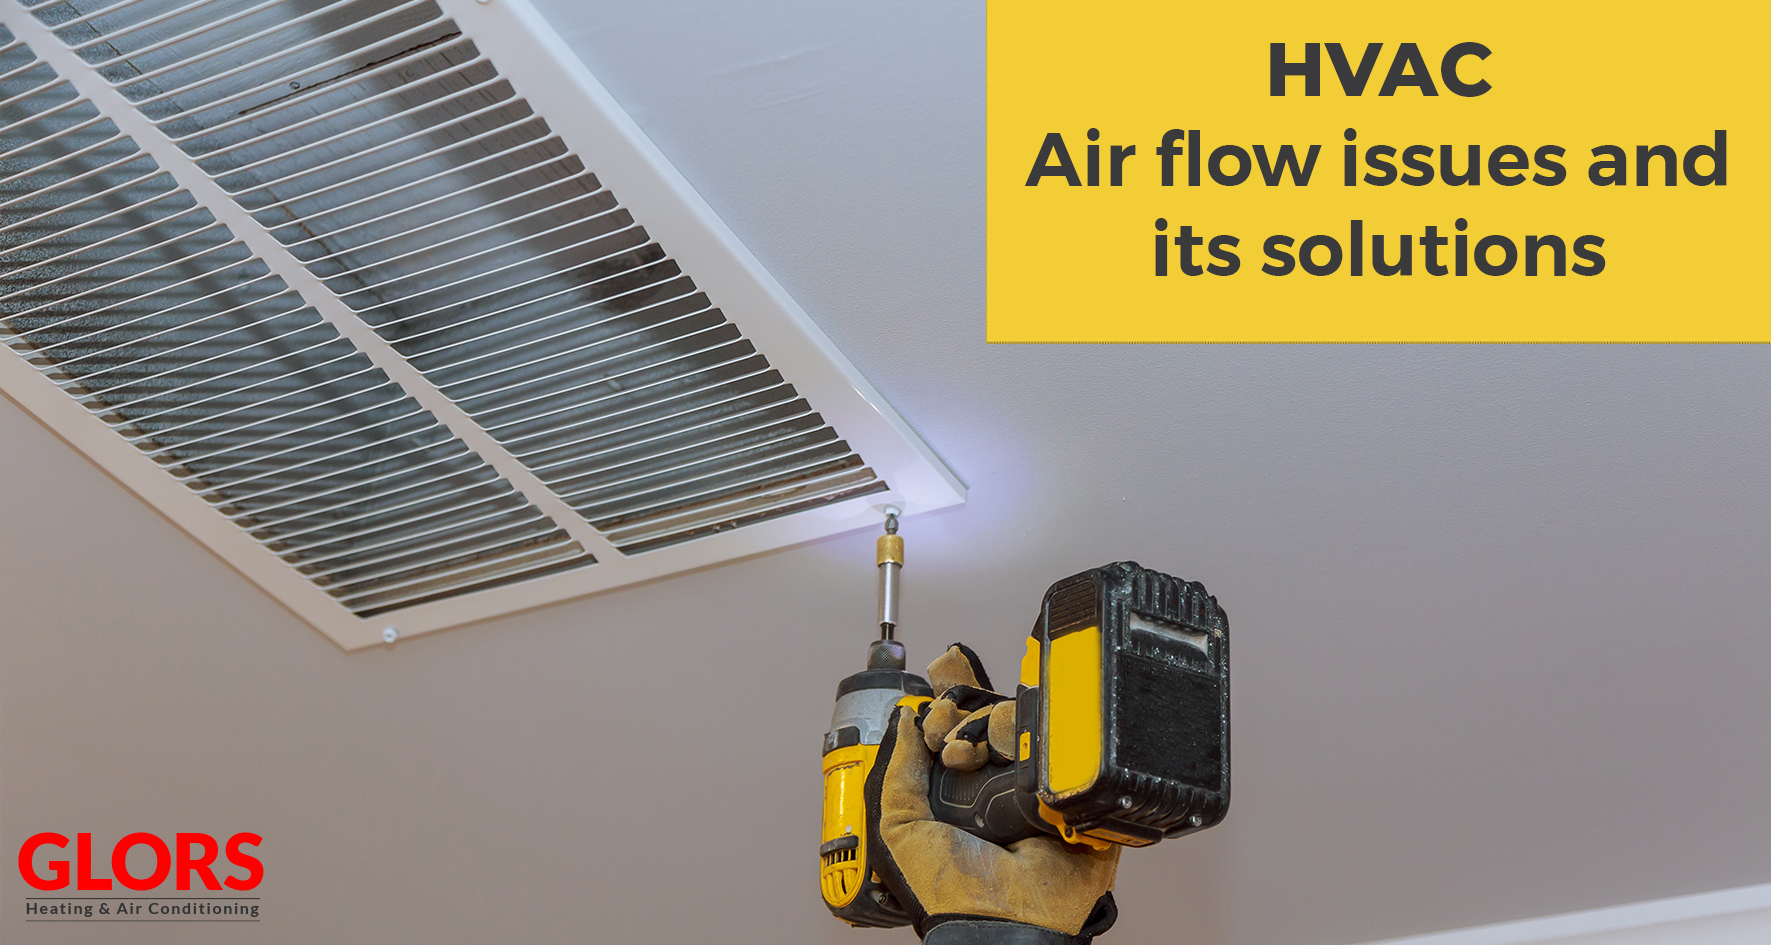 HVAC Air flow issues and its solutions